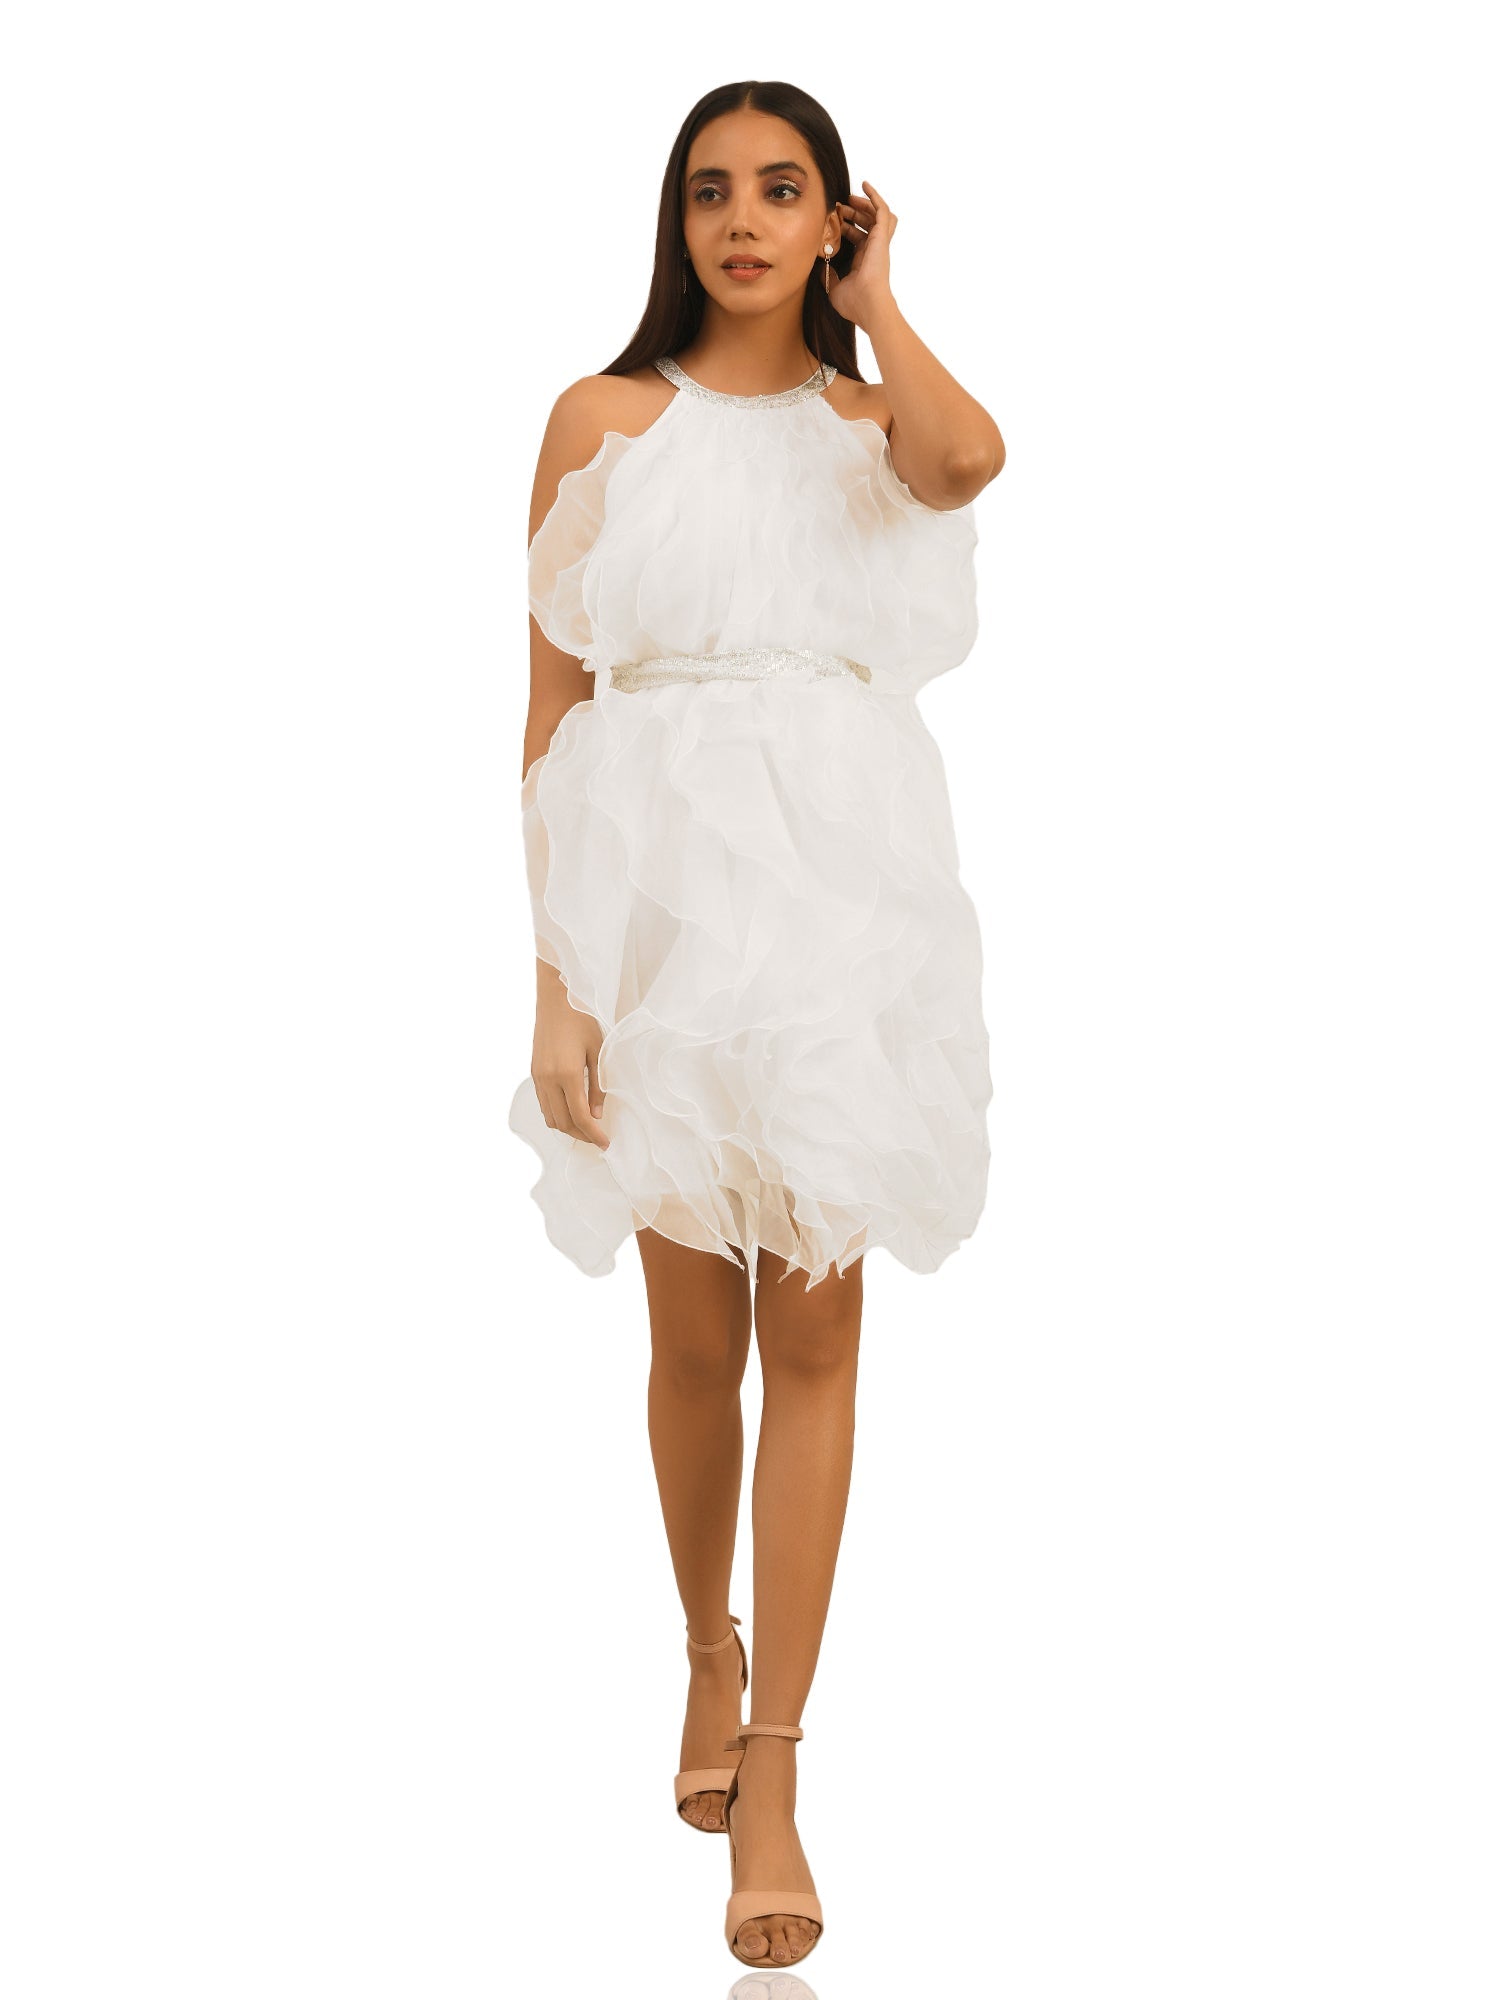 amelie all over white ruffle dress